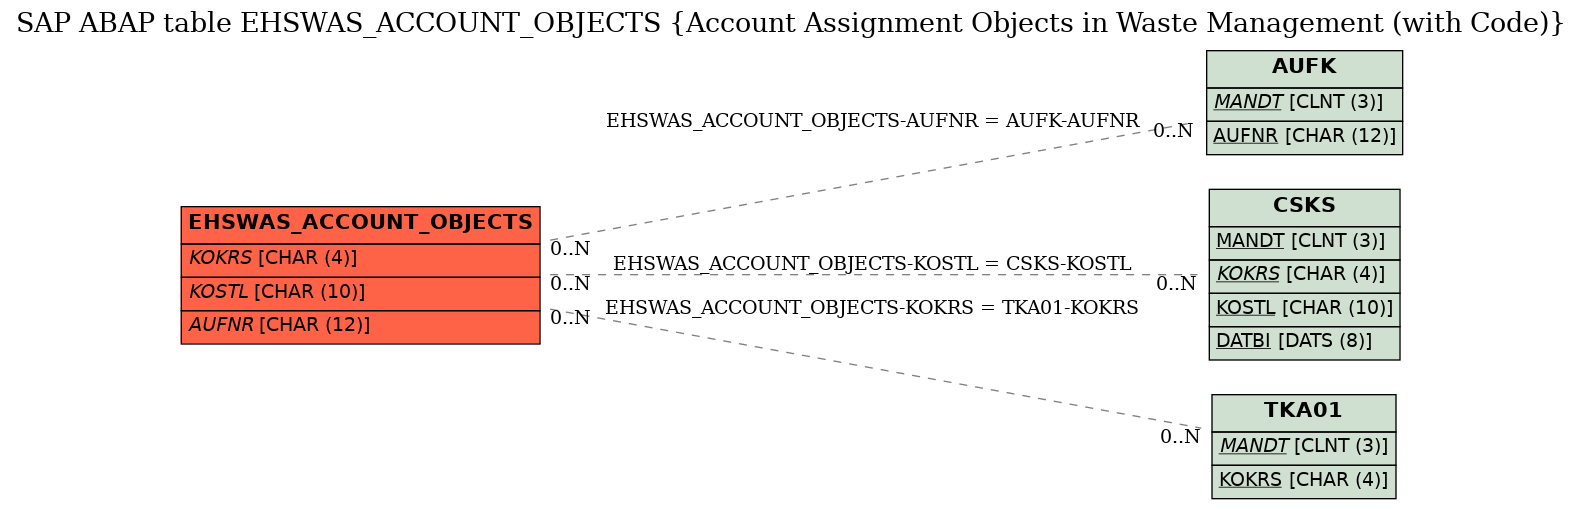 E-R Diagram for table EHSWAS_ACCOUNT_OBJECTS (Account Assignment Objects in Waste Management (with Code))